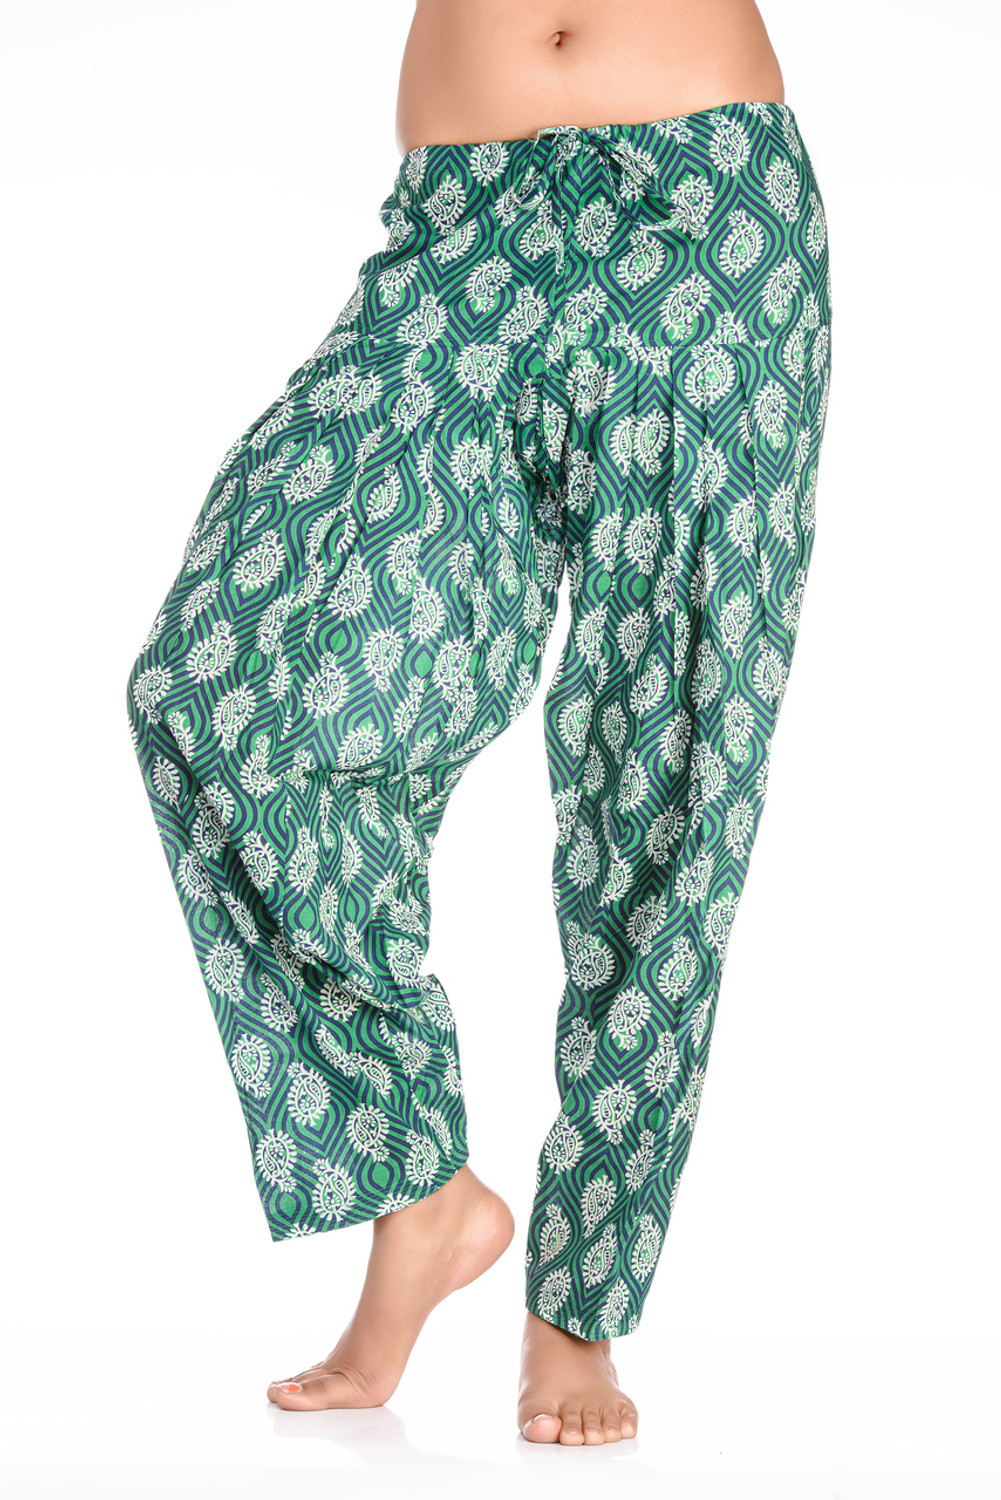 Cotton Printed Palazzo Pants For Women 57 OFF